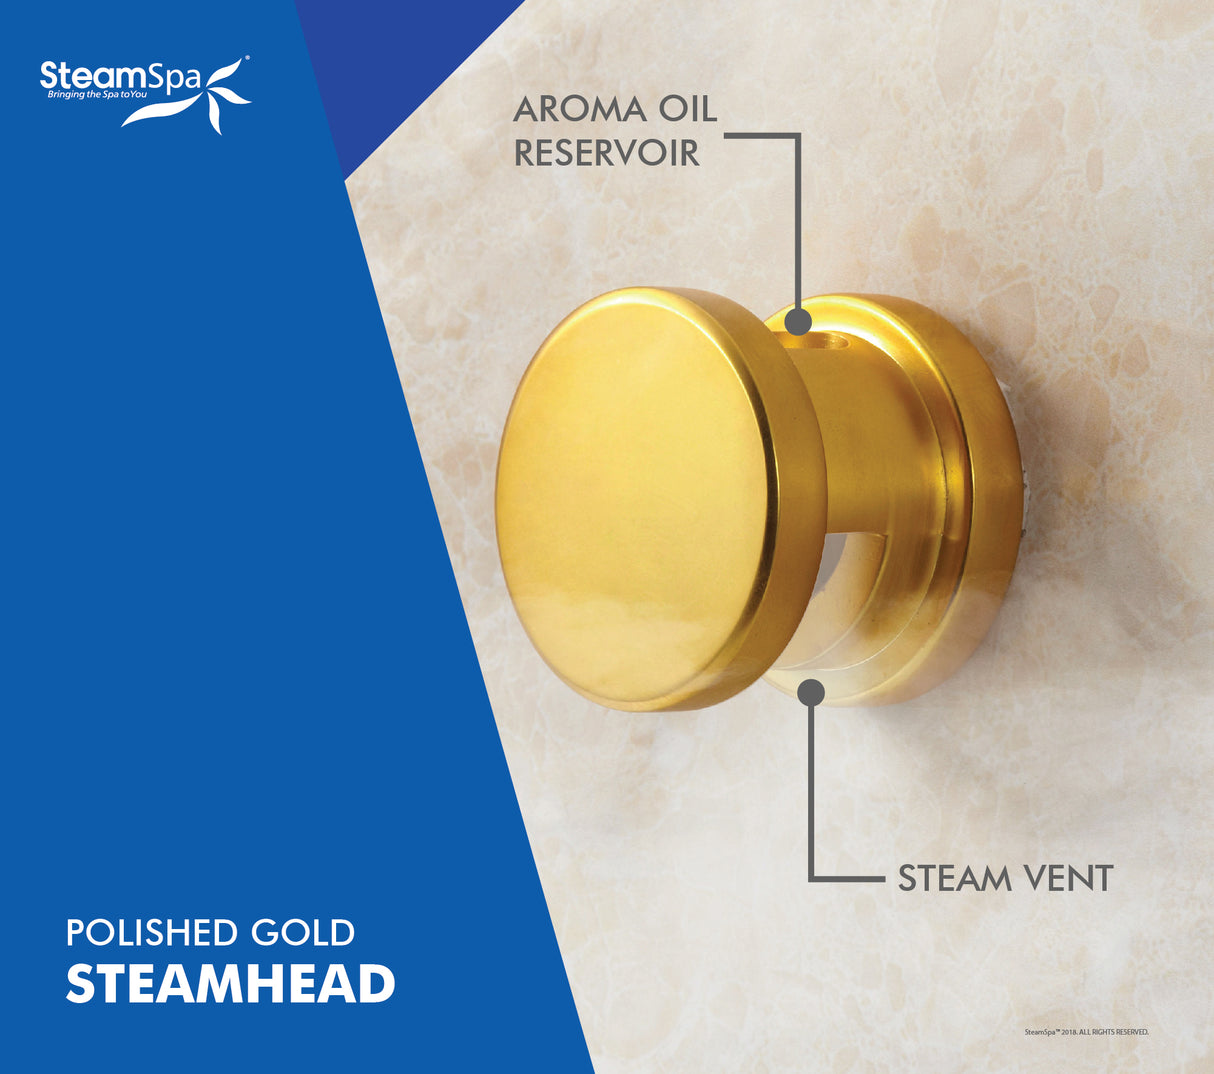 SteamSpa Oasis 10.5 KW QuickStart Acu-Steam Bath Generator Package in Polished Gold OA1050GD